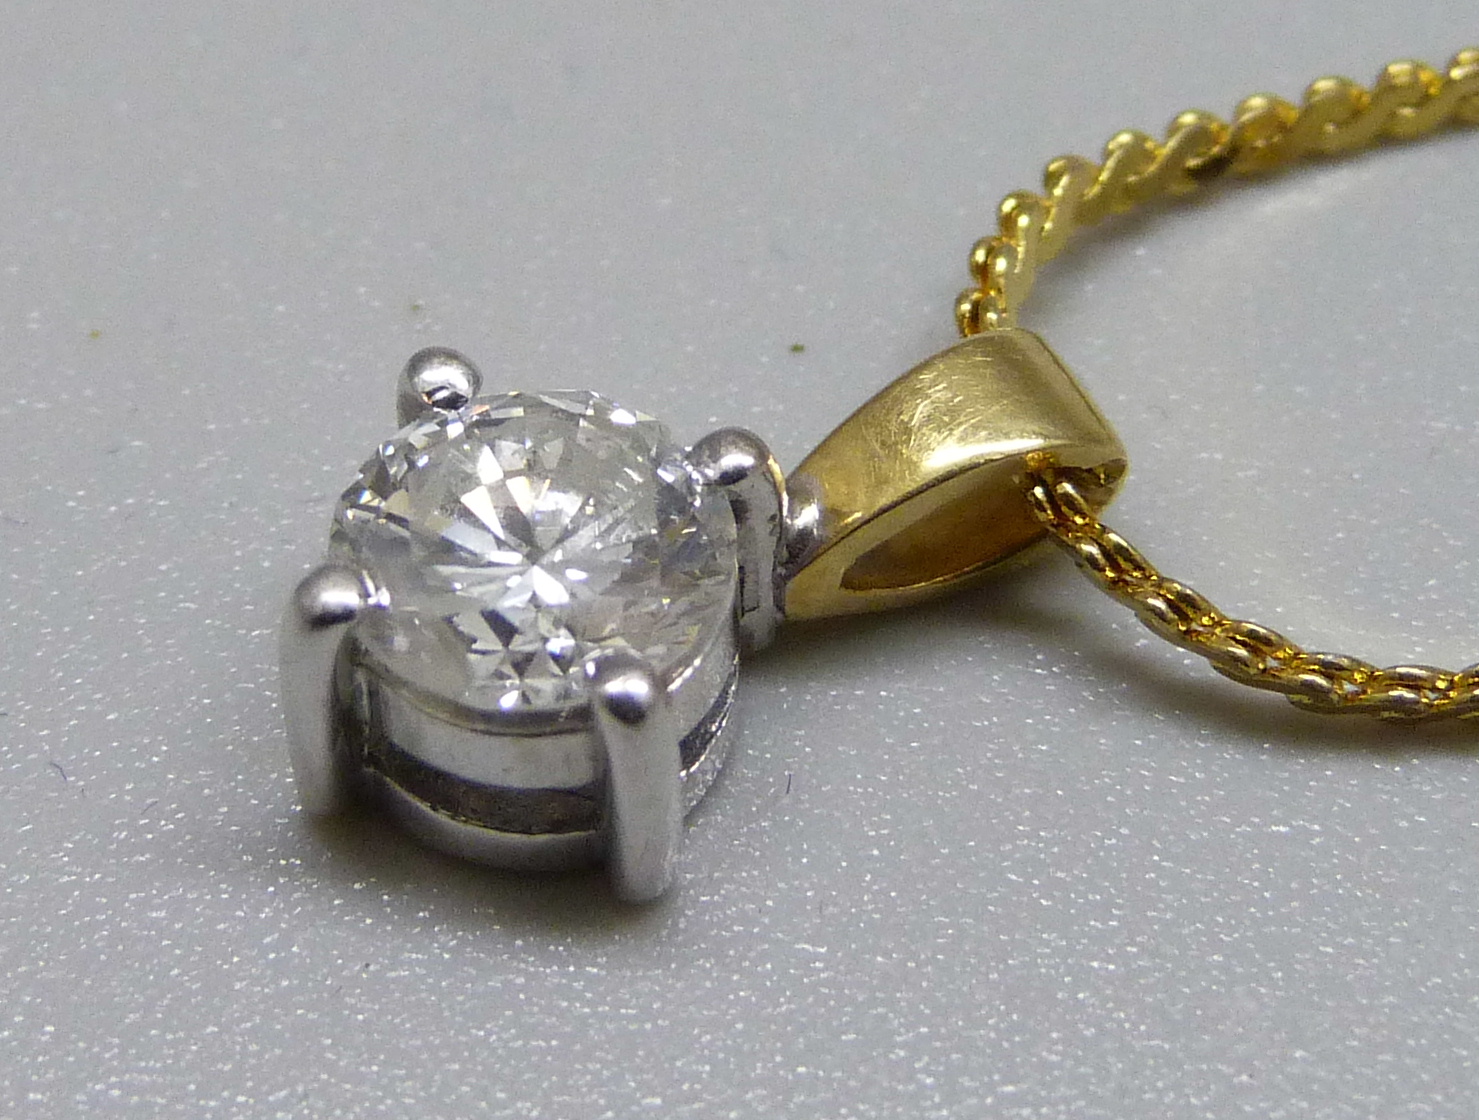 An 18ct gold and diamond pendant, approximately 0.90ct diamond weight, on a plated chain